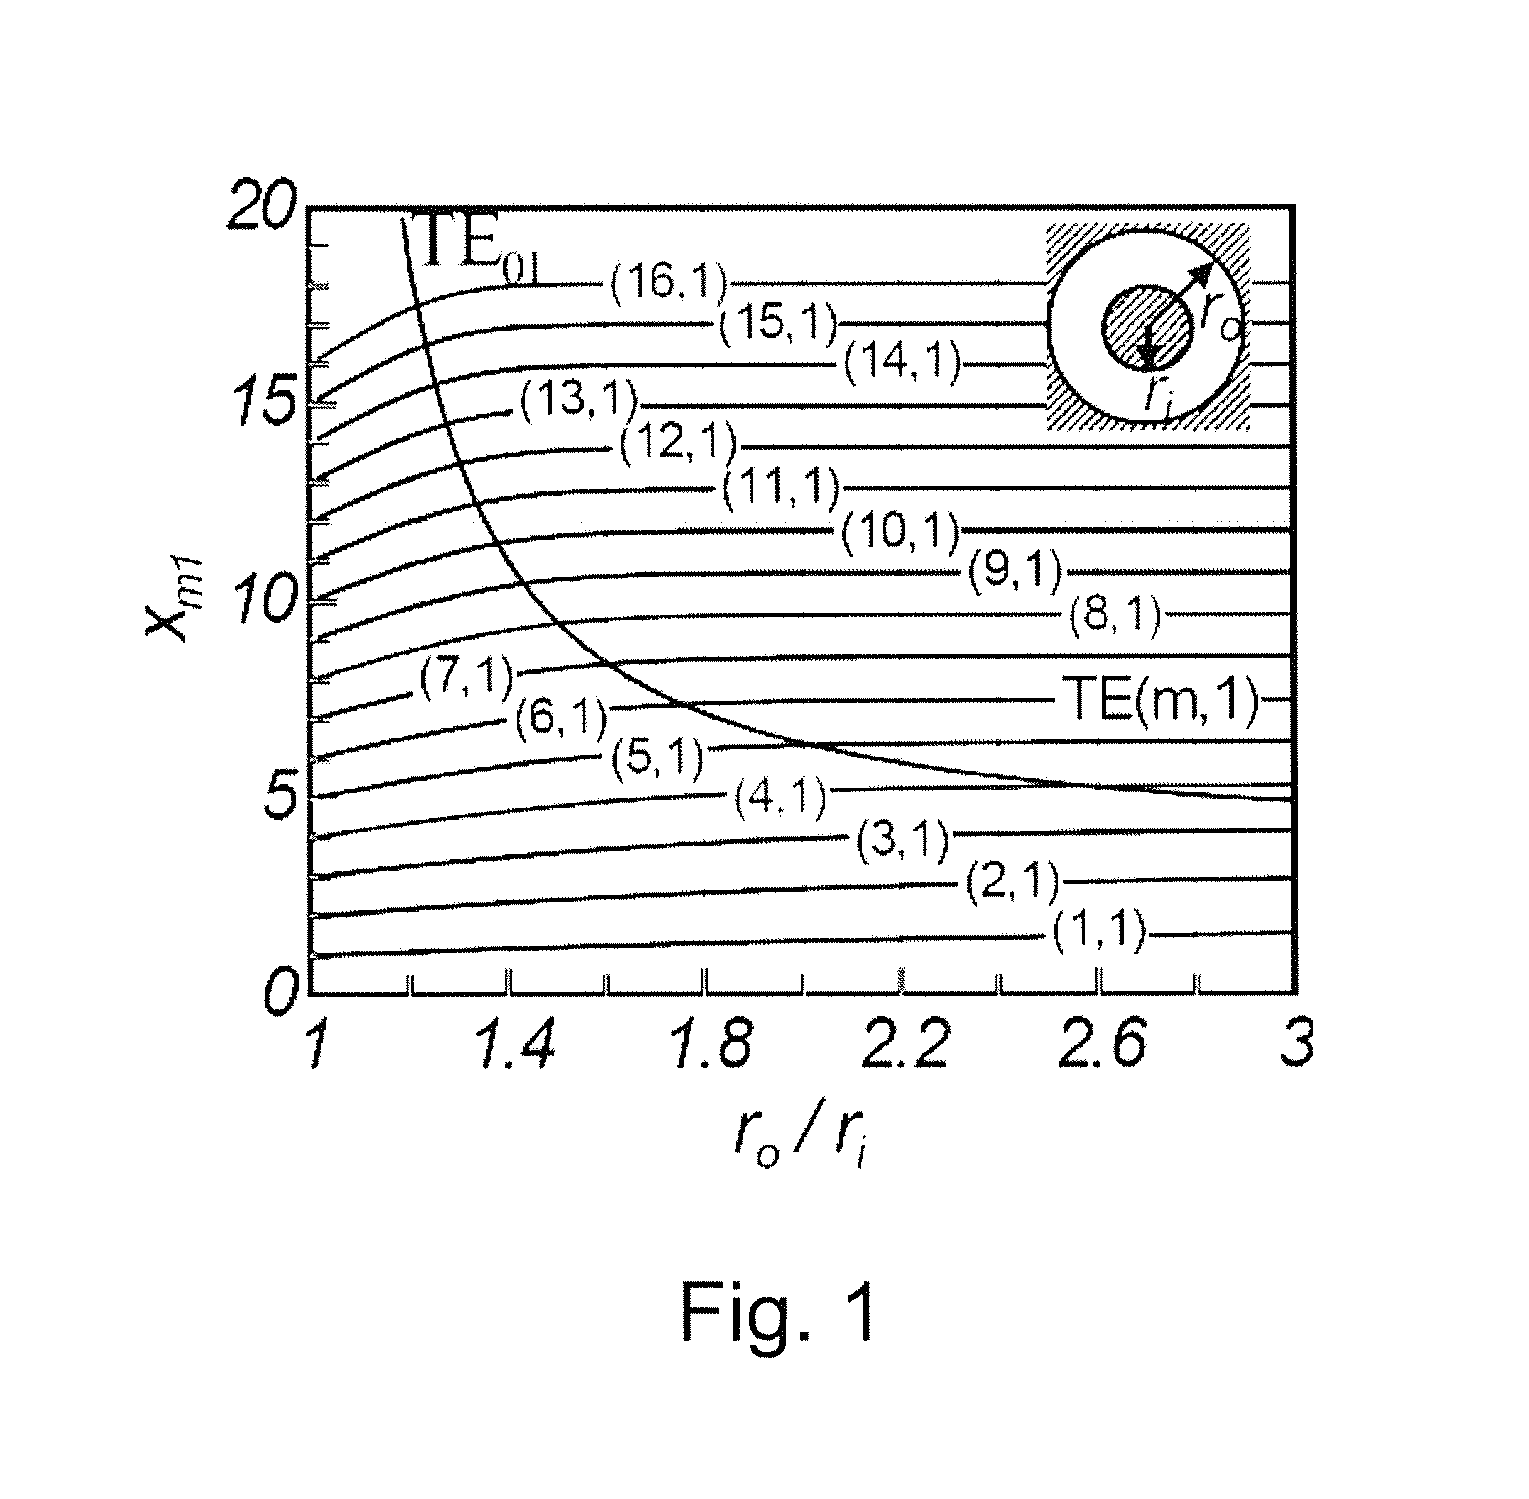 Multi-channel mode converter and rotary joint operating with a series of te or tm mode electromagnetic wave